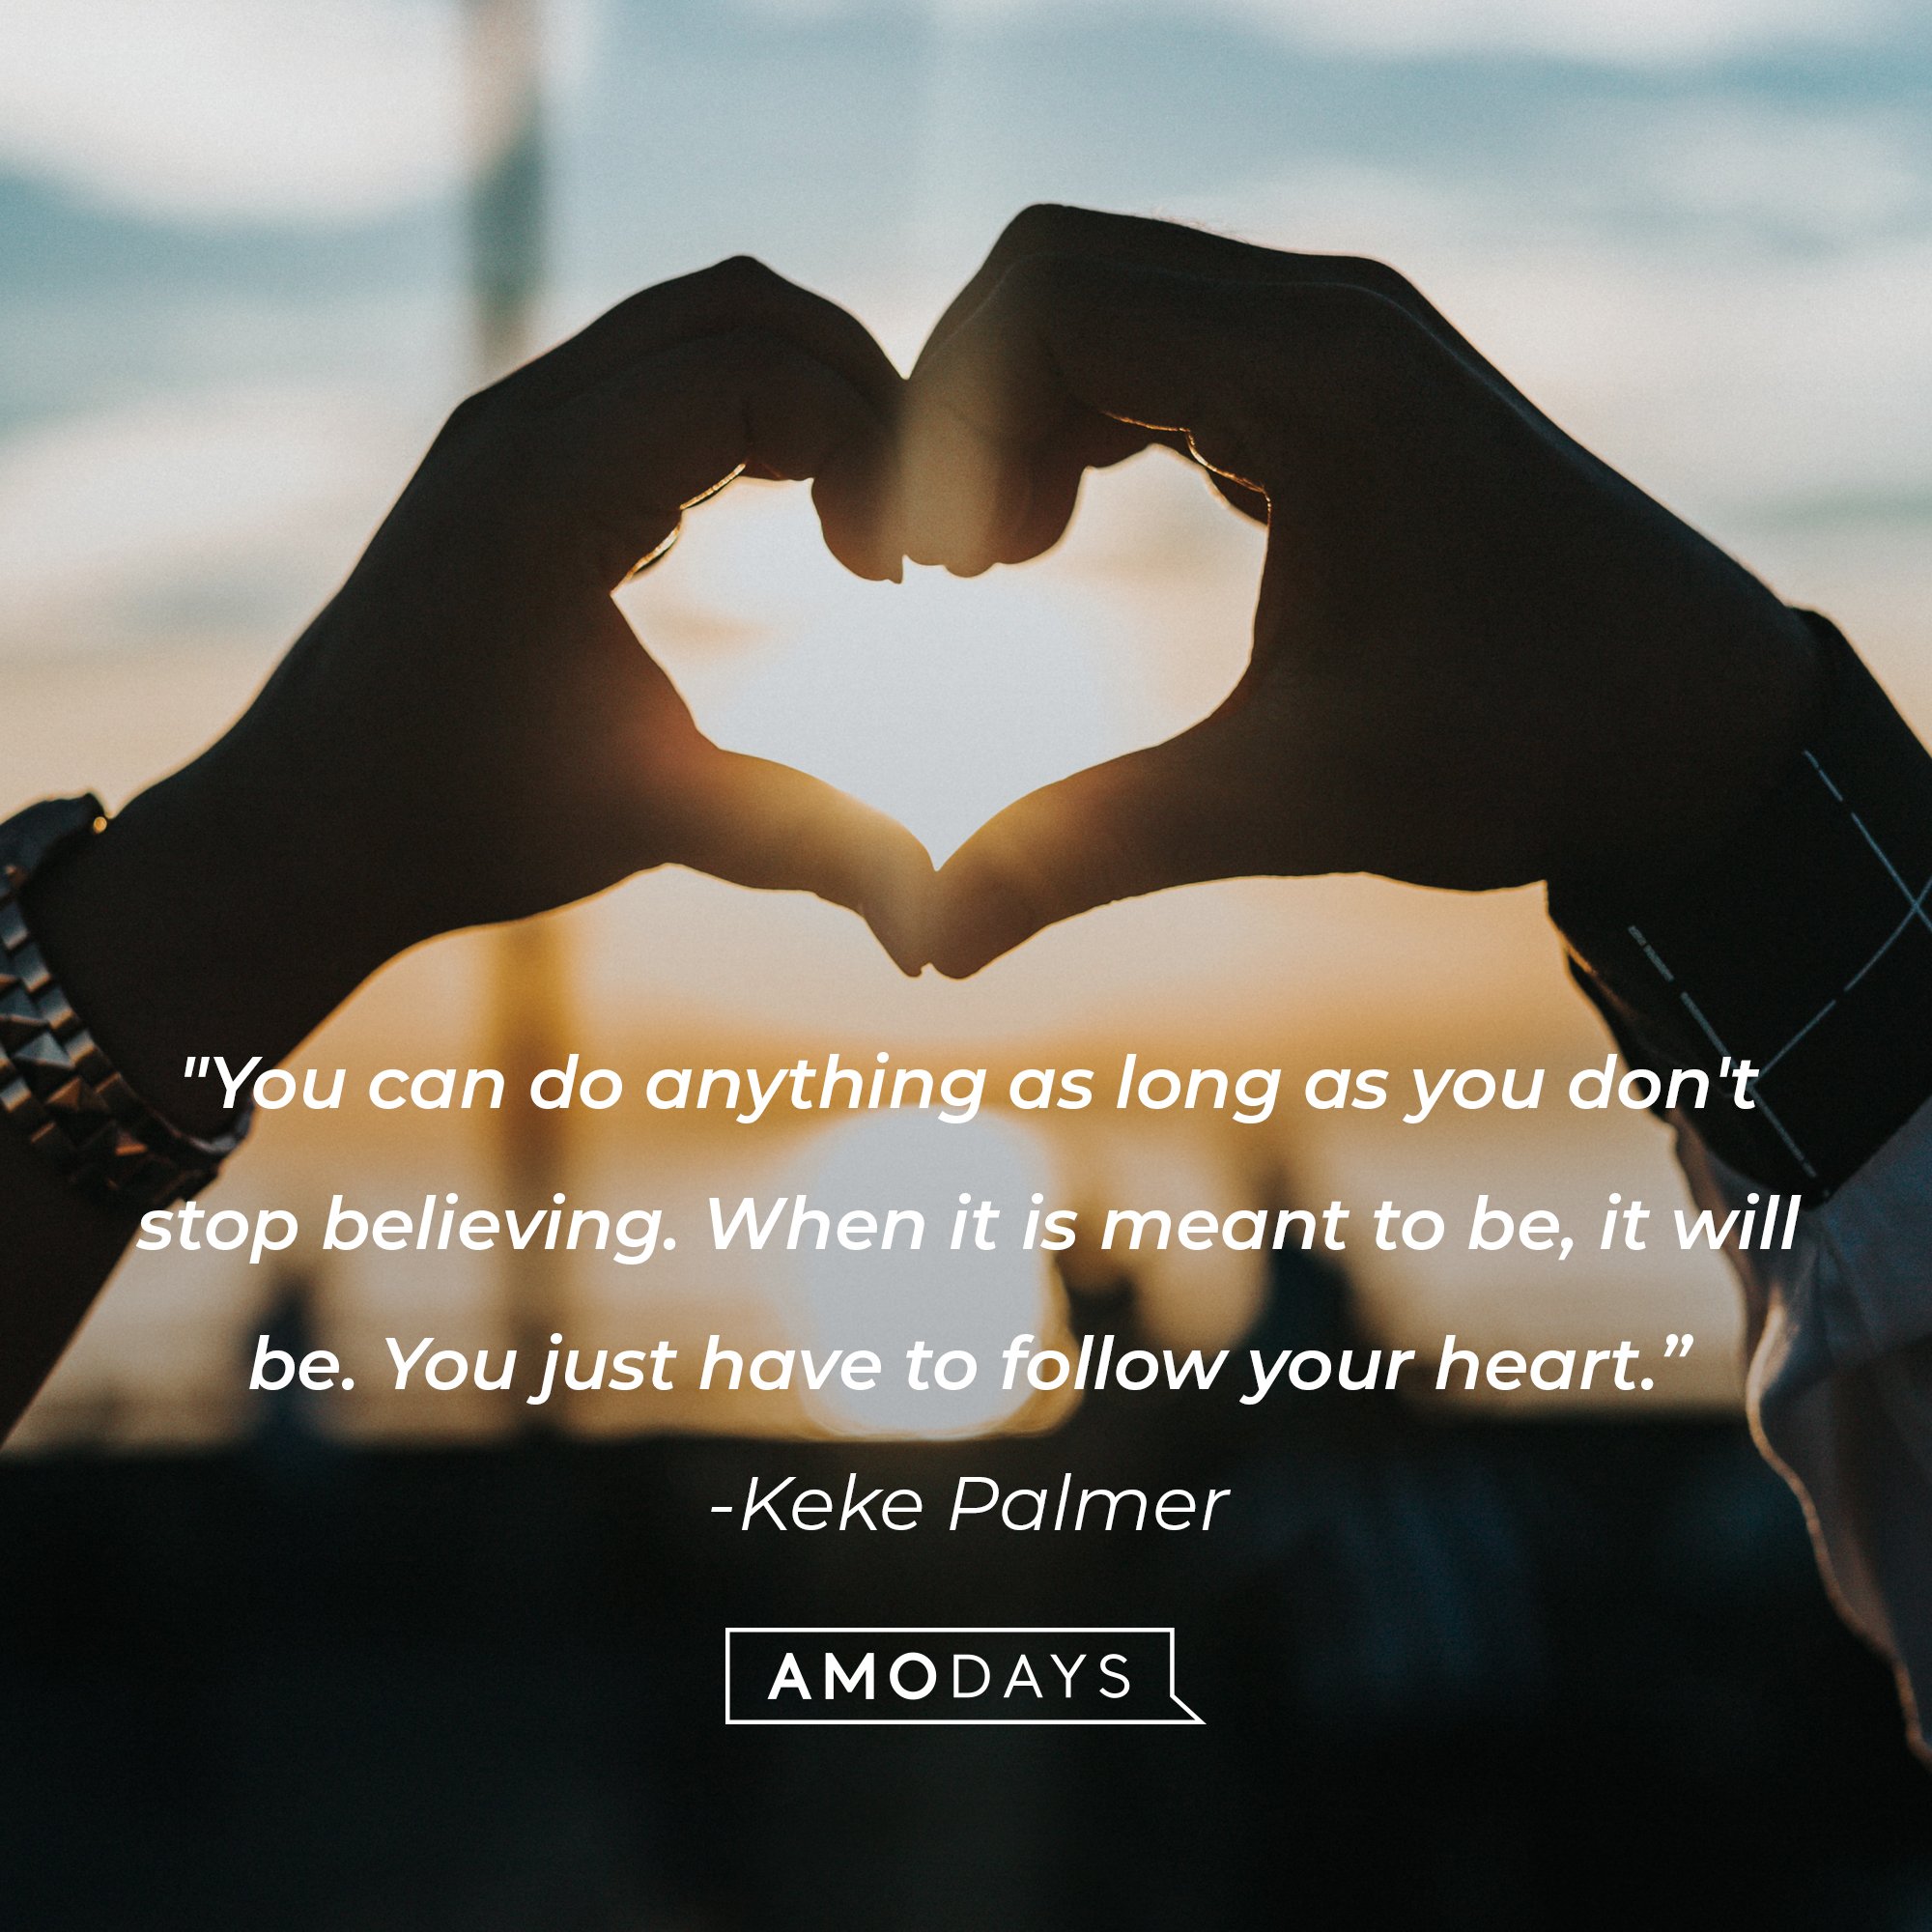 Keke Palmer’s quote: "You can do anything as long as you don't stop believing. When it is meant to be, it will be. You just have to follow your heart.” | Image: AmoDays 